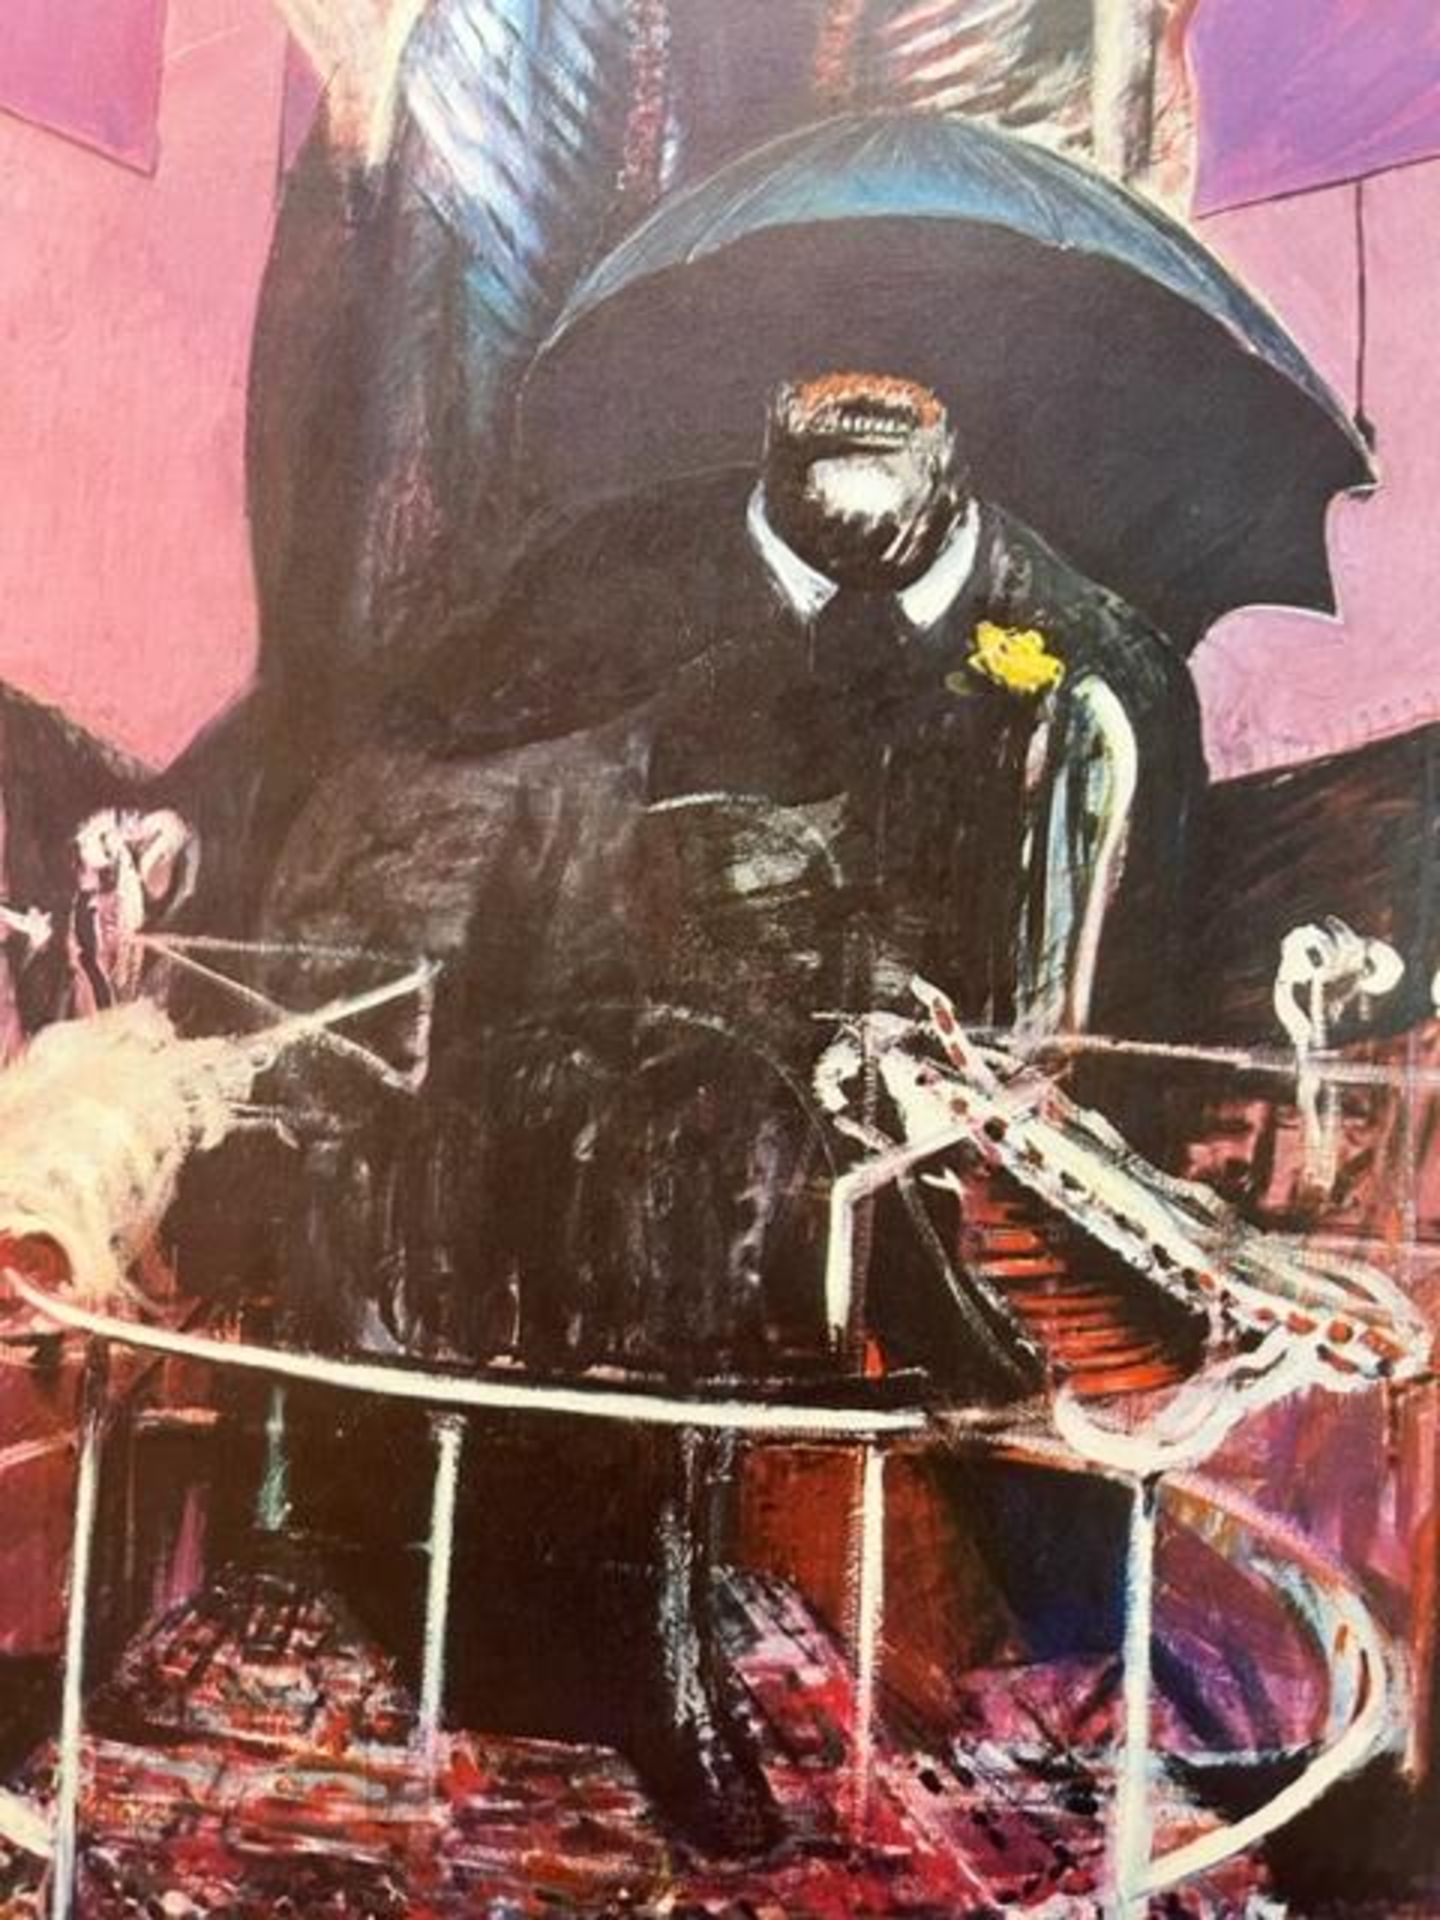 Francis Bacon "Painting" Print. - Image 9 of 12